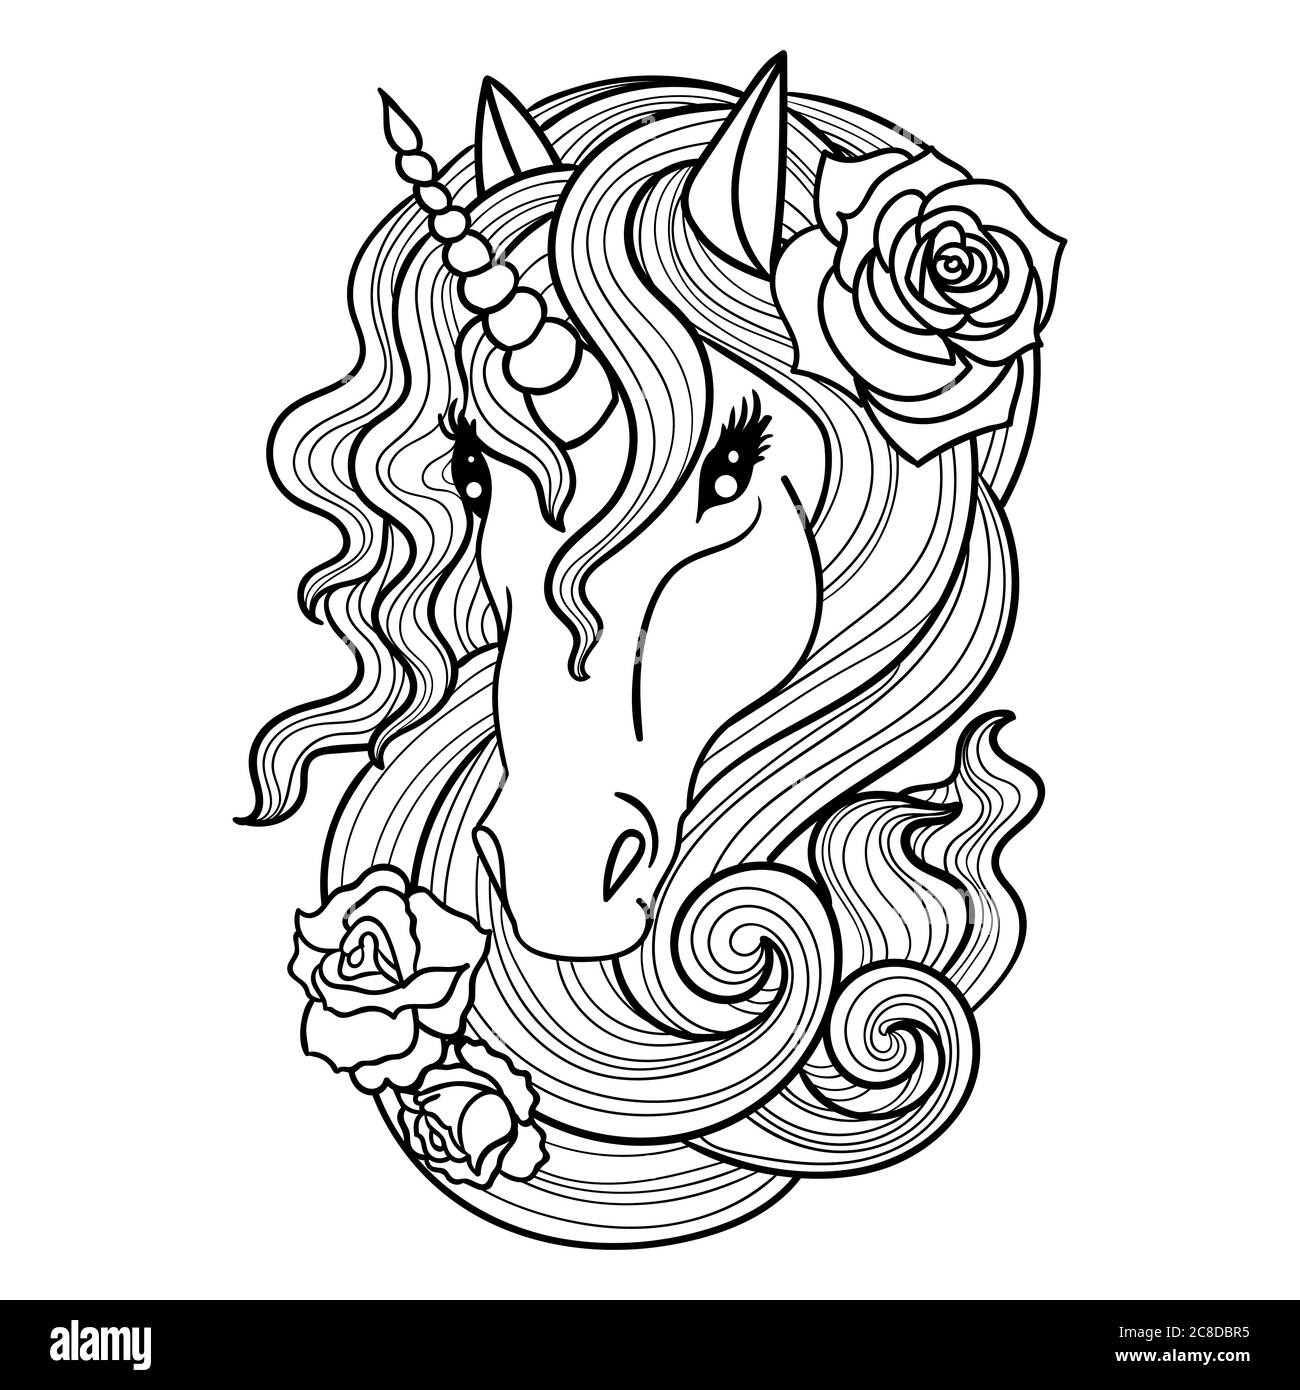 Head of a unicorn with roses in the mane. Black and white. Suitable for tattoos, coloring books, prints, posters. postcards and so on Stock Vector